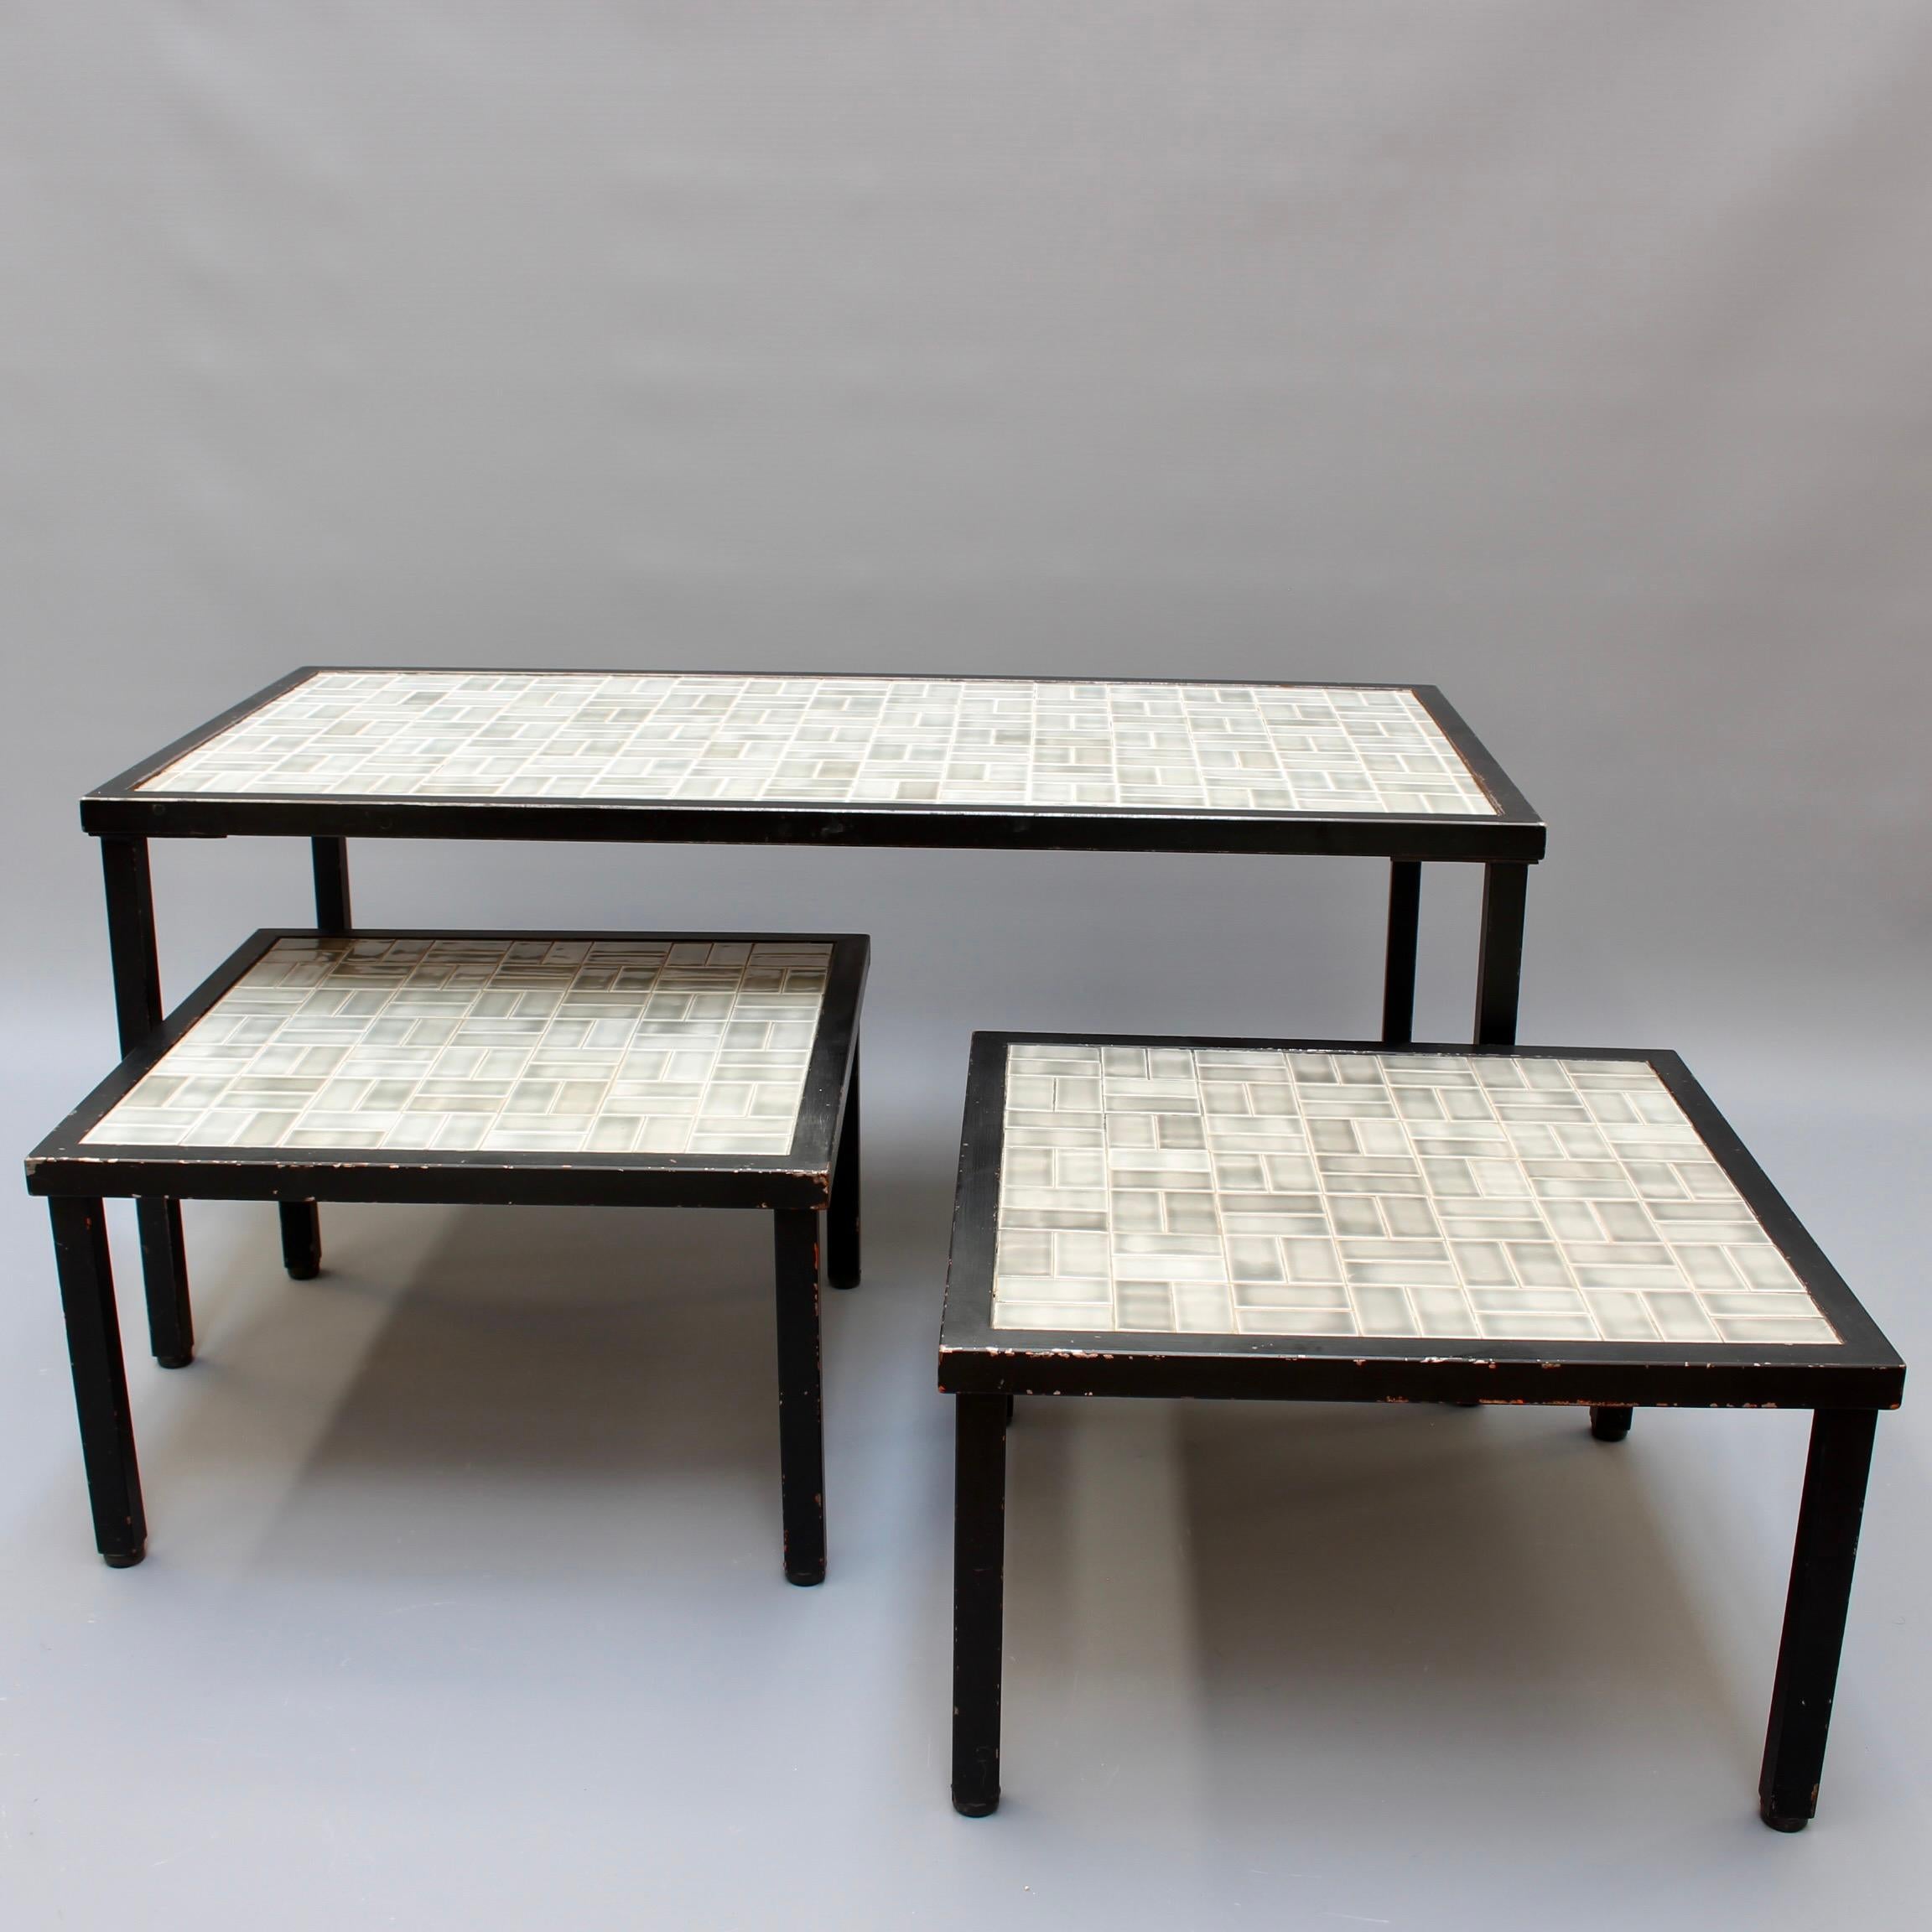 Set of three vintage French tiled coffee and end tables (circa 1960s). Subdued hues shade the ceramic tiles which sit upon simple frames and black metal legs in modern symmetry. The tiles are grey, cream and a faded black seemingly painted with